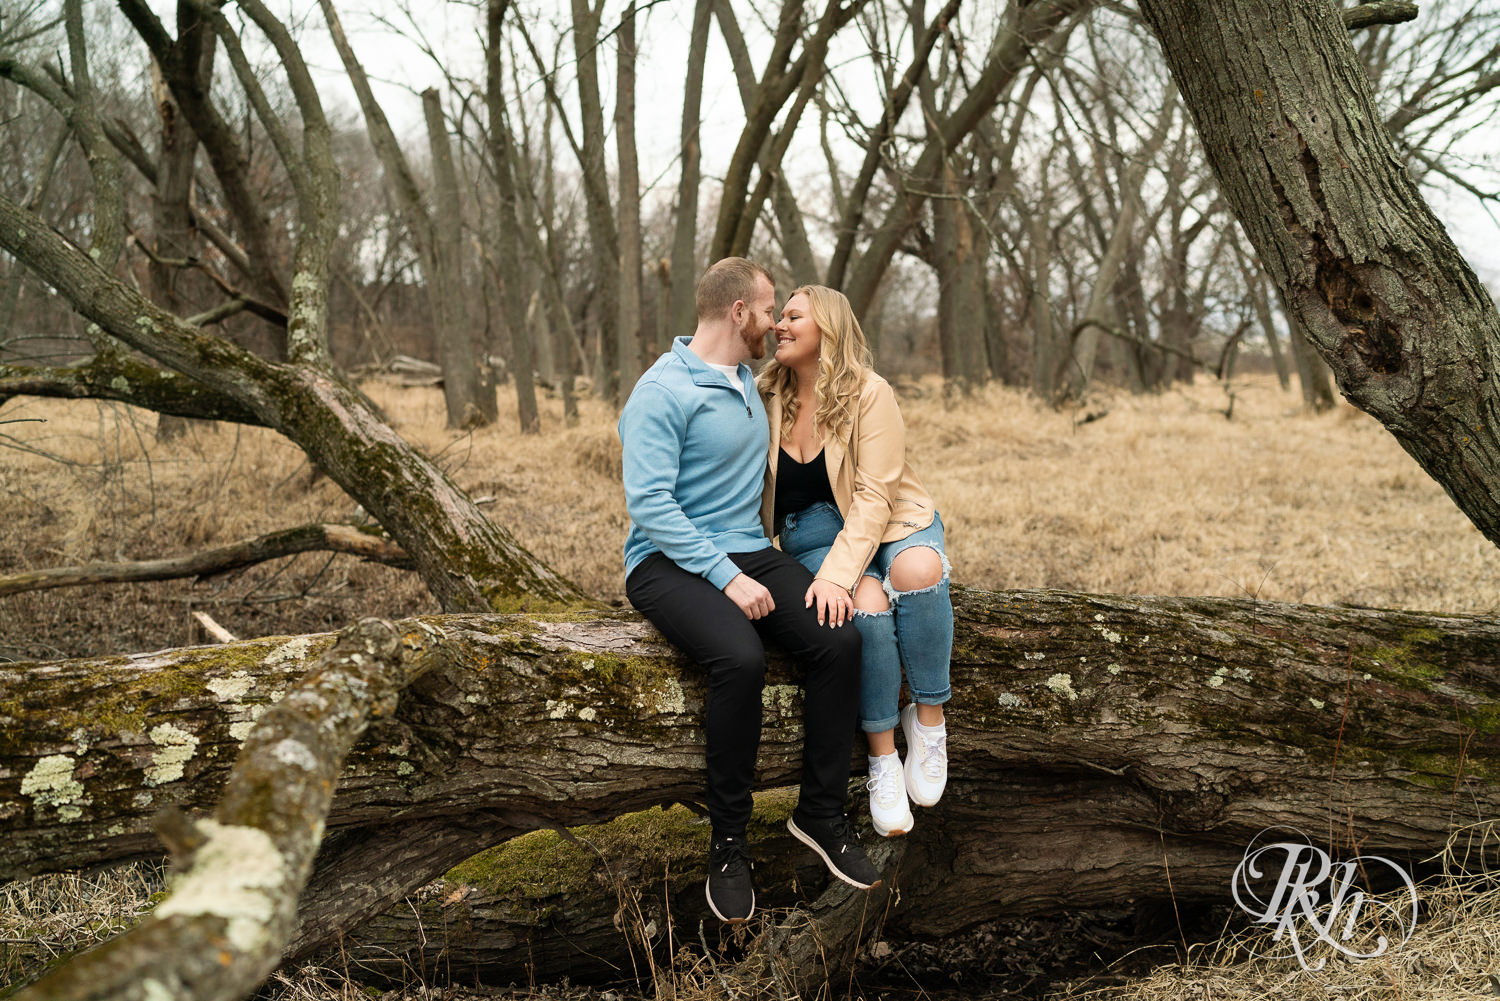 Man in blue shirt and woman in jeans sit on fallen tree during engagement photography at Rice Creek Regional Trail in Shoreview, Minnesota.